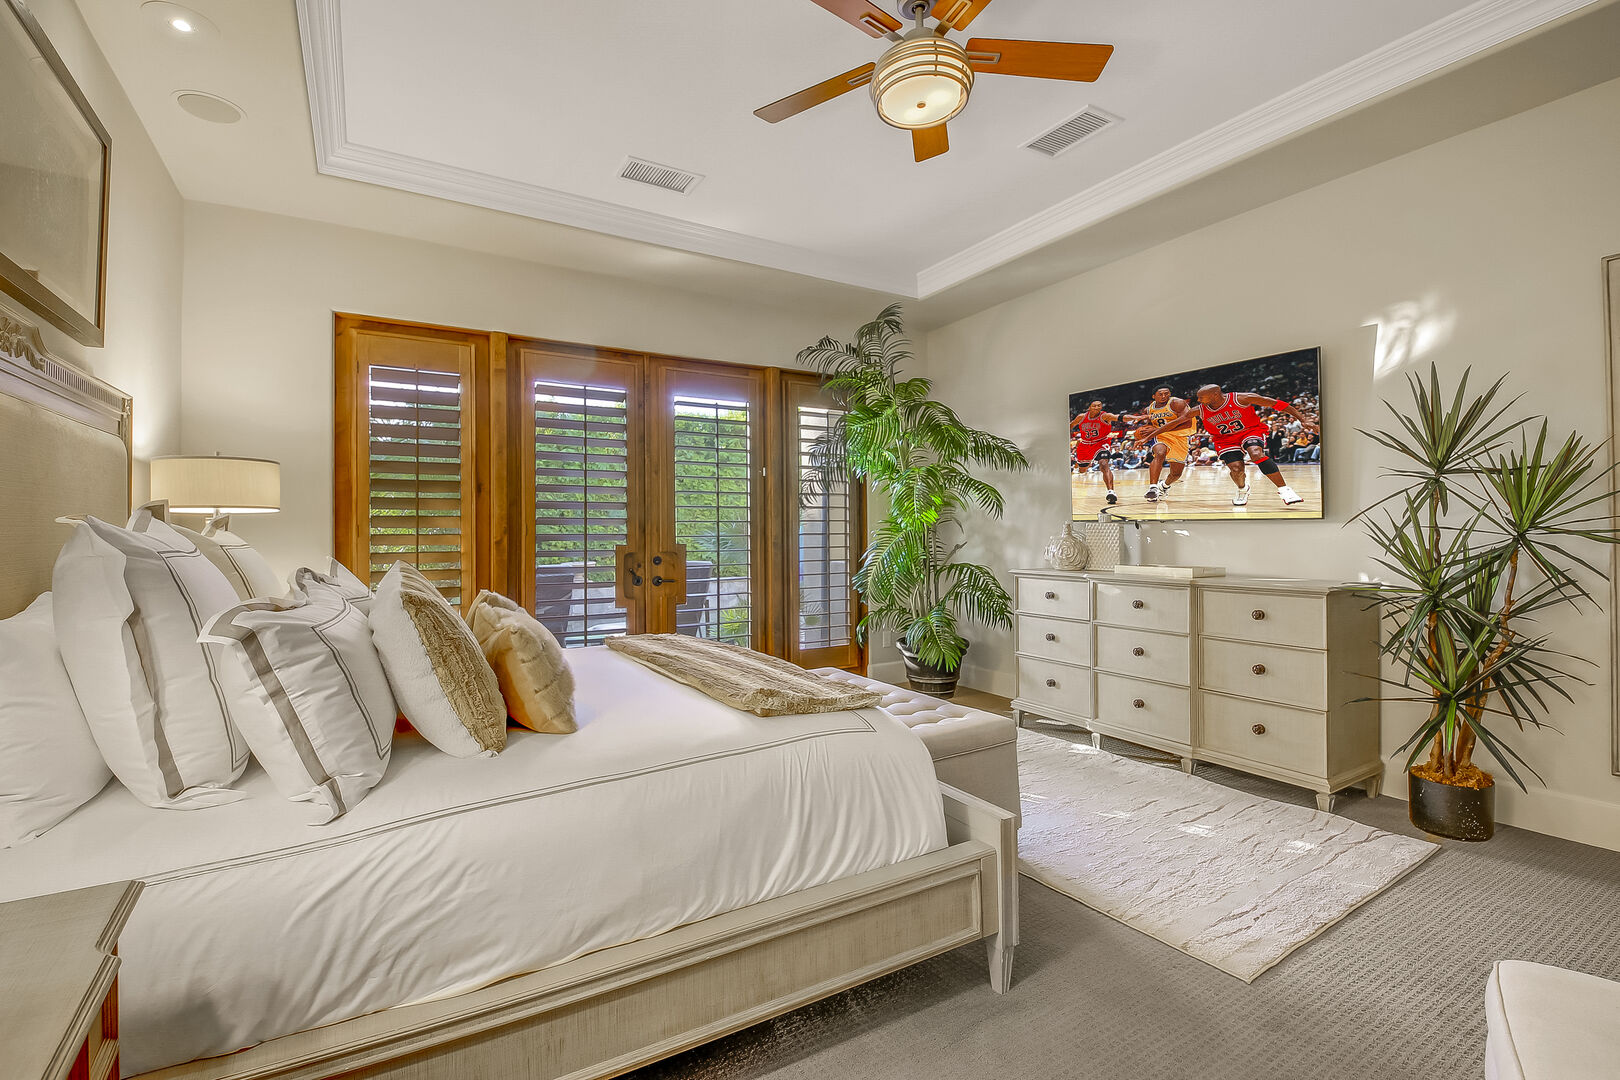 Master Suite 1 is located to the right of the hallway and features a King-sized Bed, 65-inch Samsung 4K Smart television, and remote-controlled ceiling fan.